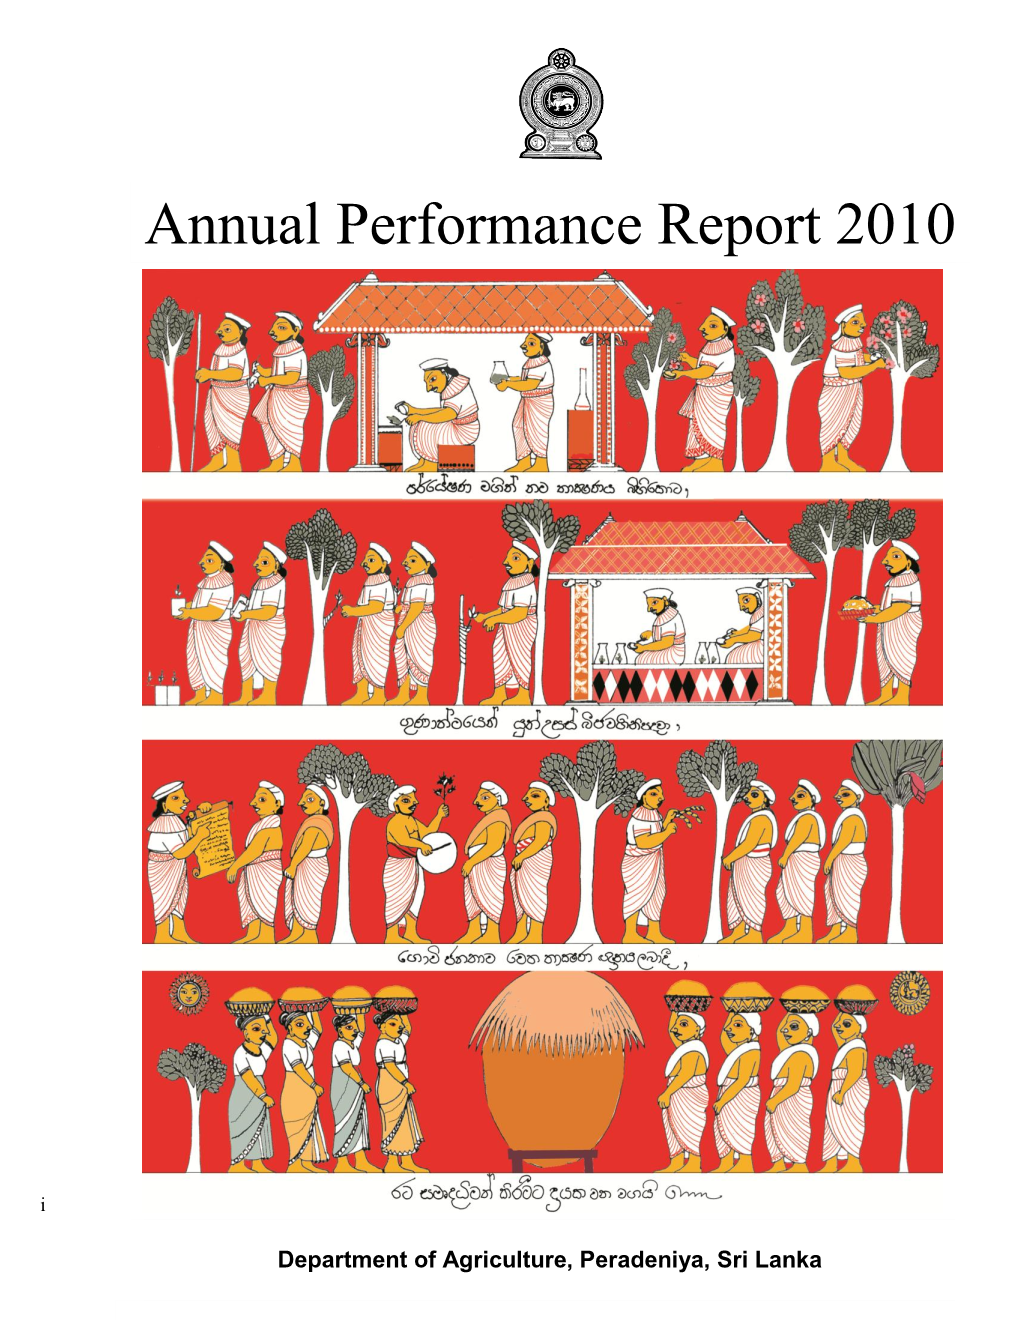 Annual Performance Report of The